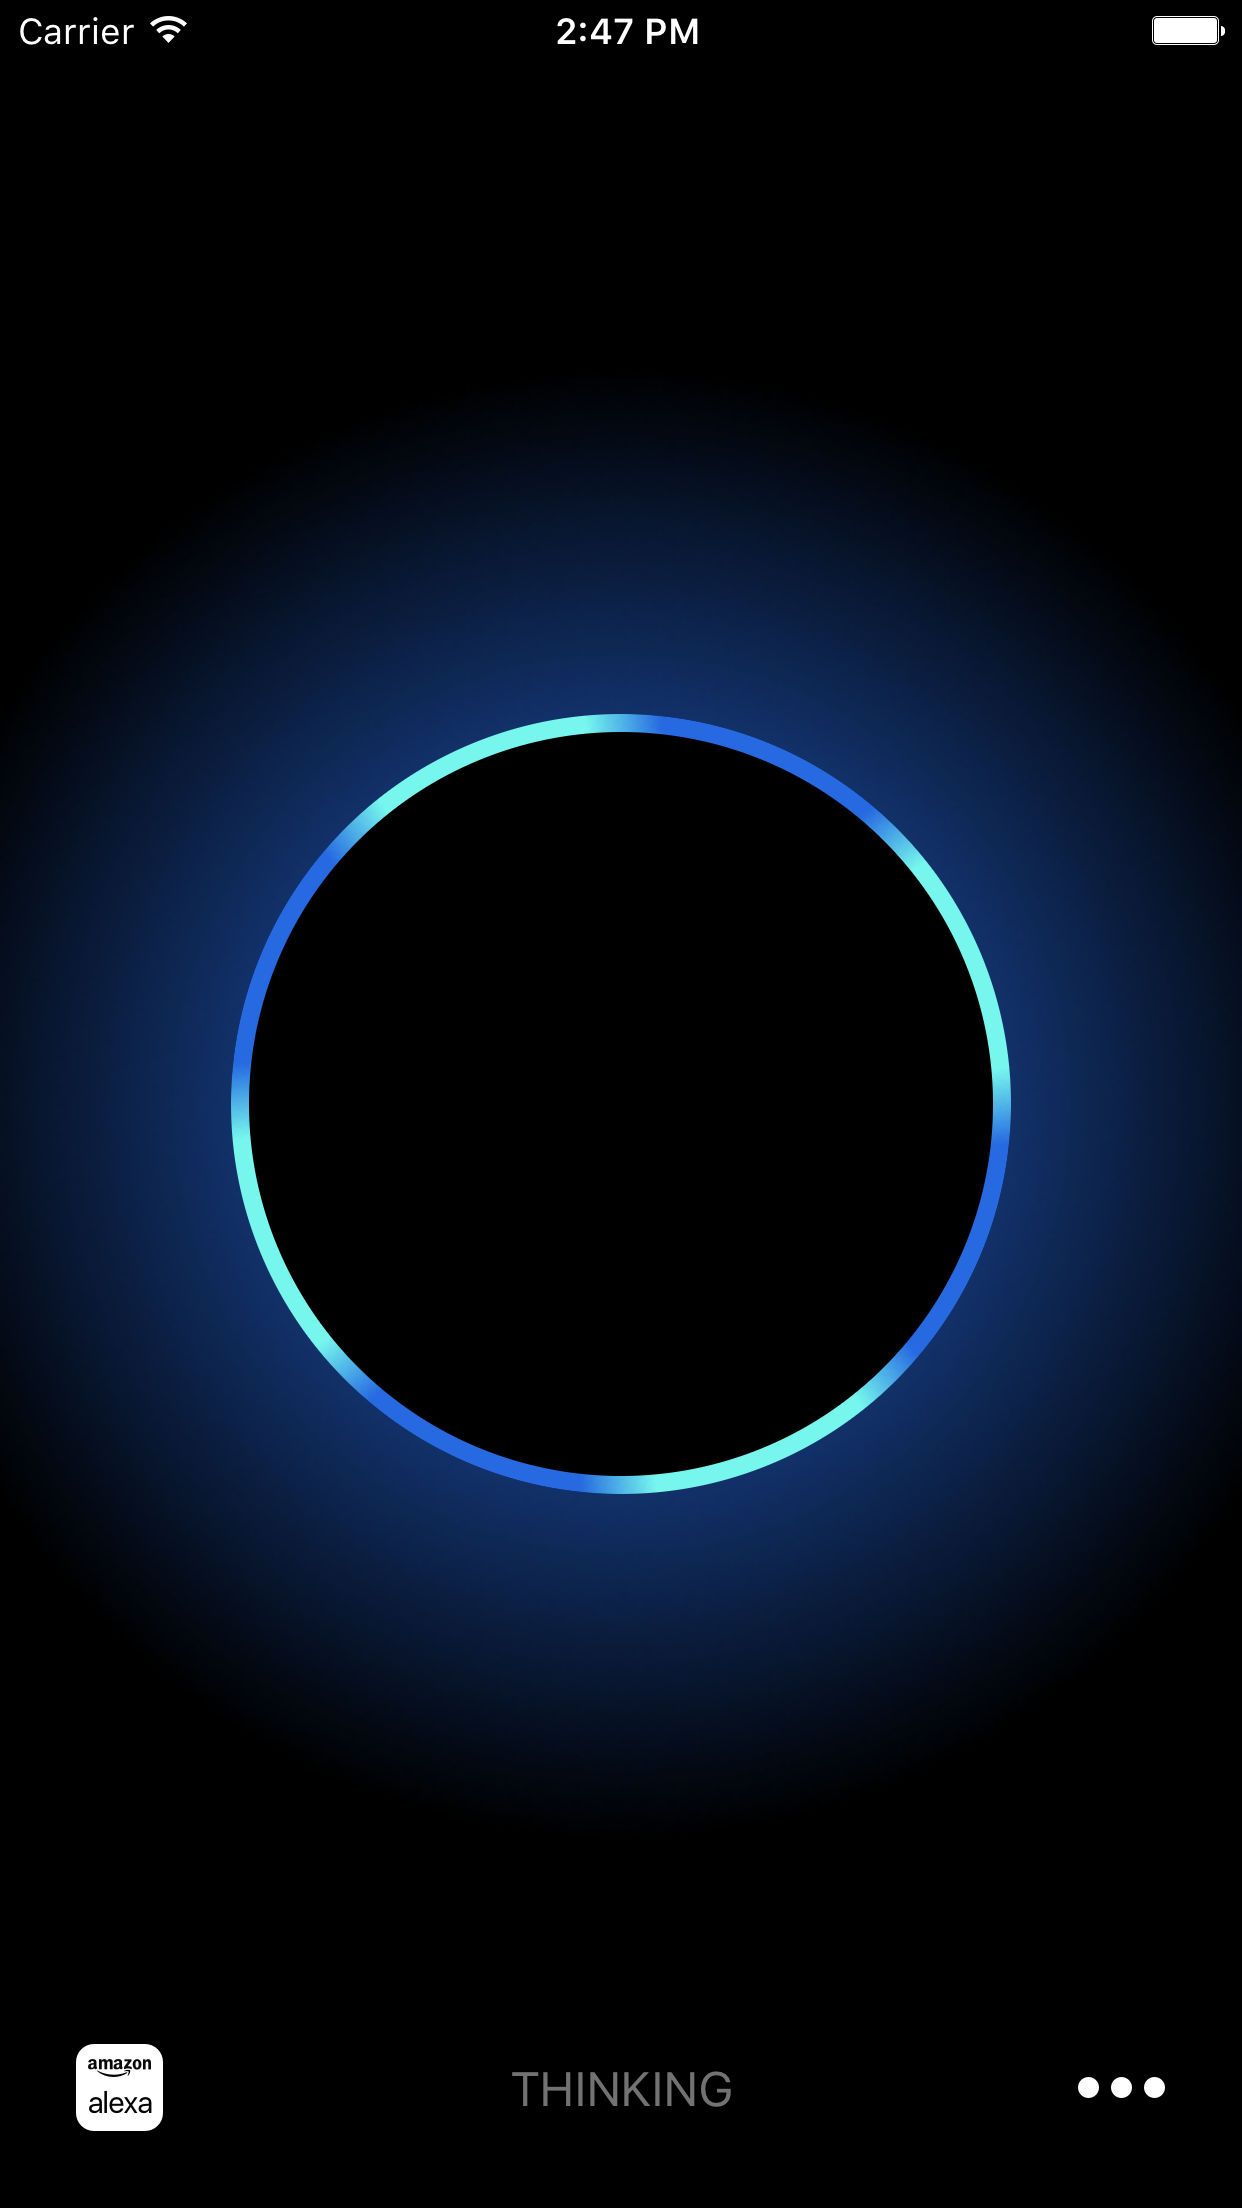 Reverb For Amazon Alexa By Rain Wallpaper In Puter